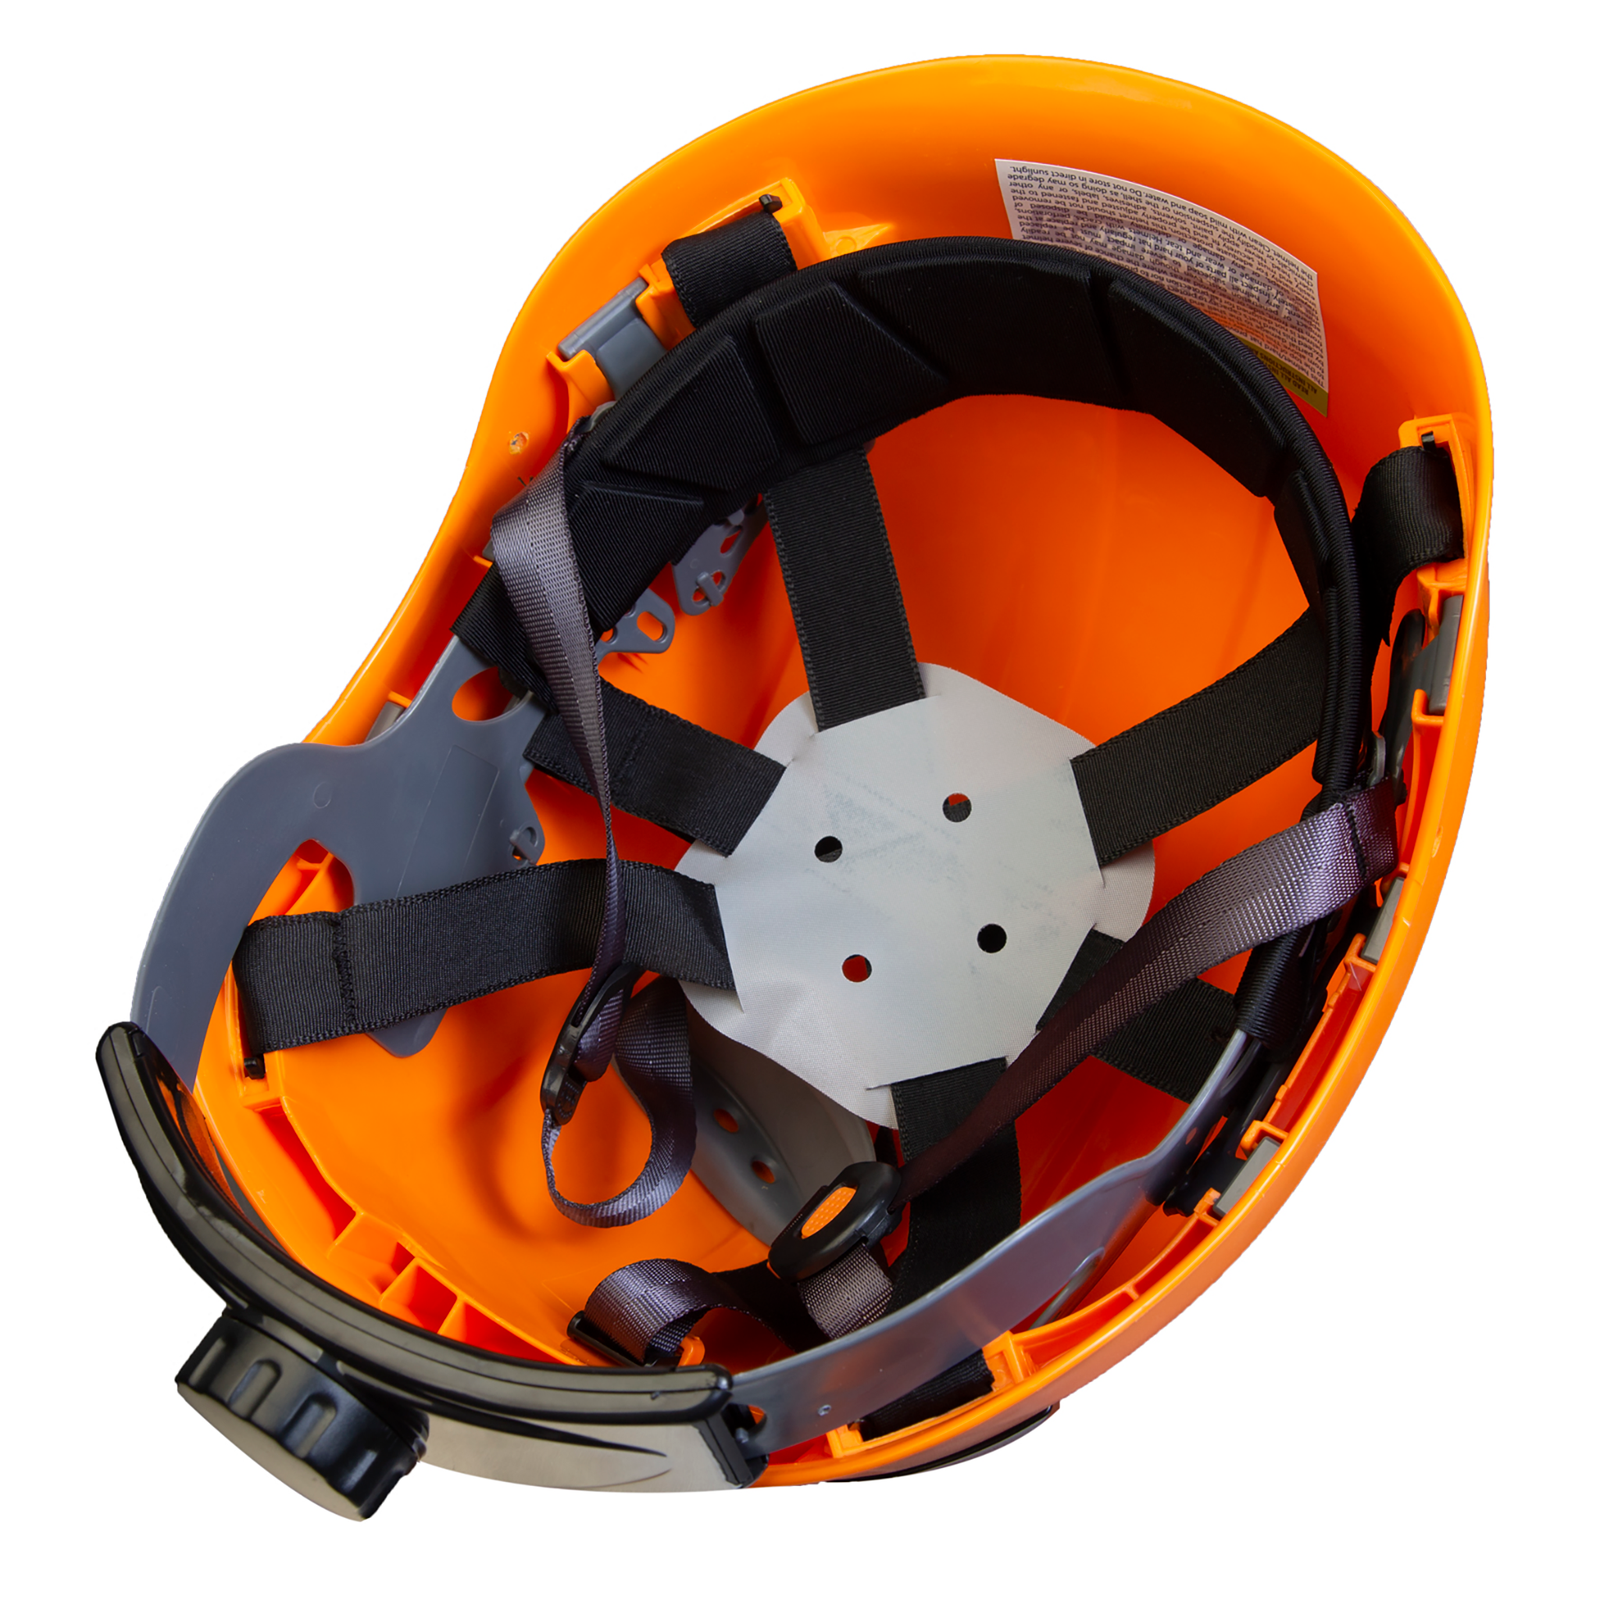 An orange JORESTECH hard hat 03 with a 6 point suspension harness installed 